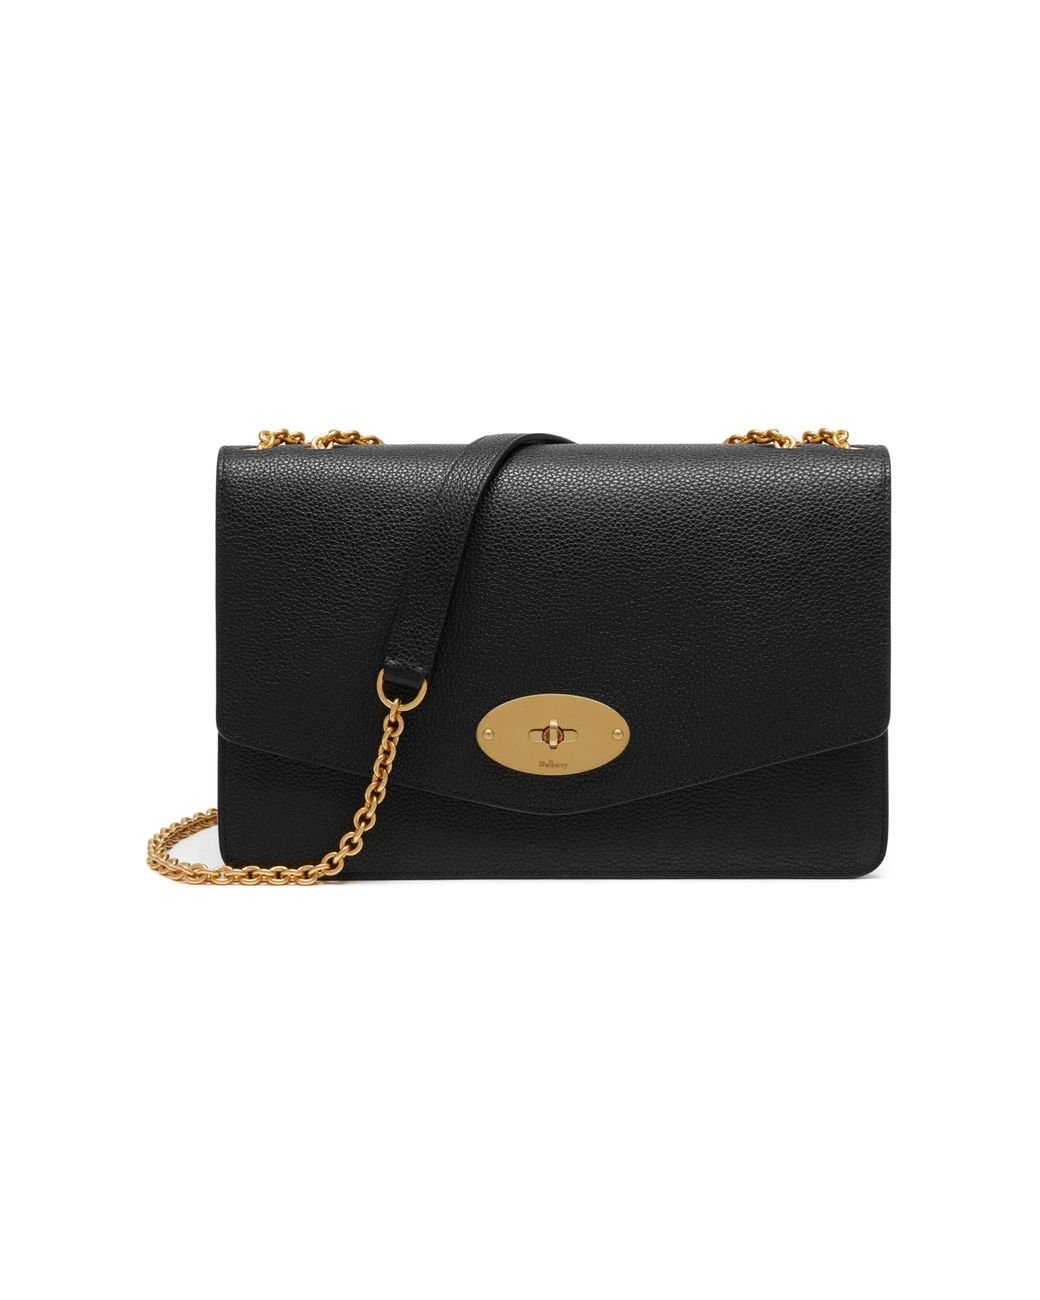 Mulberry Large Darley in Black | Lyst UK